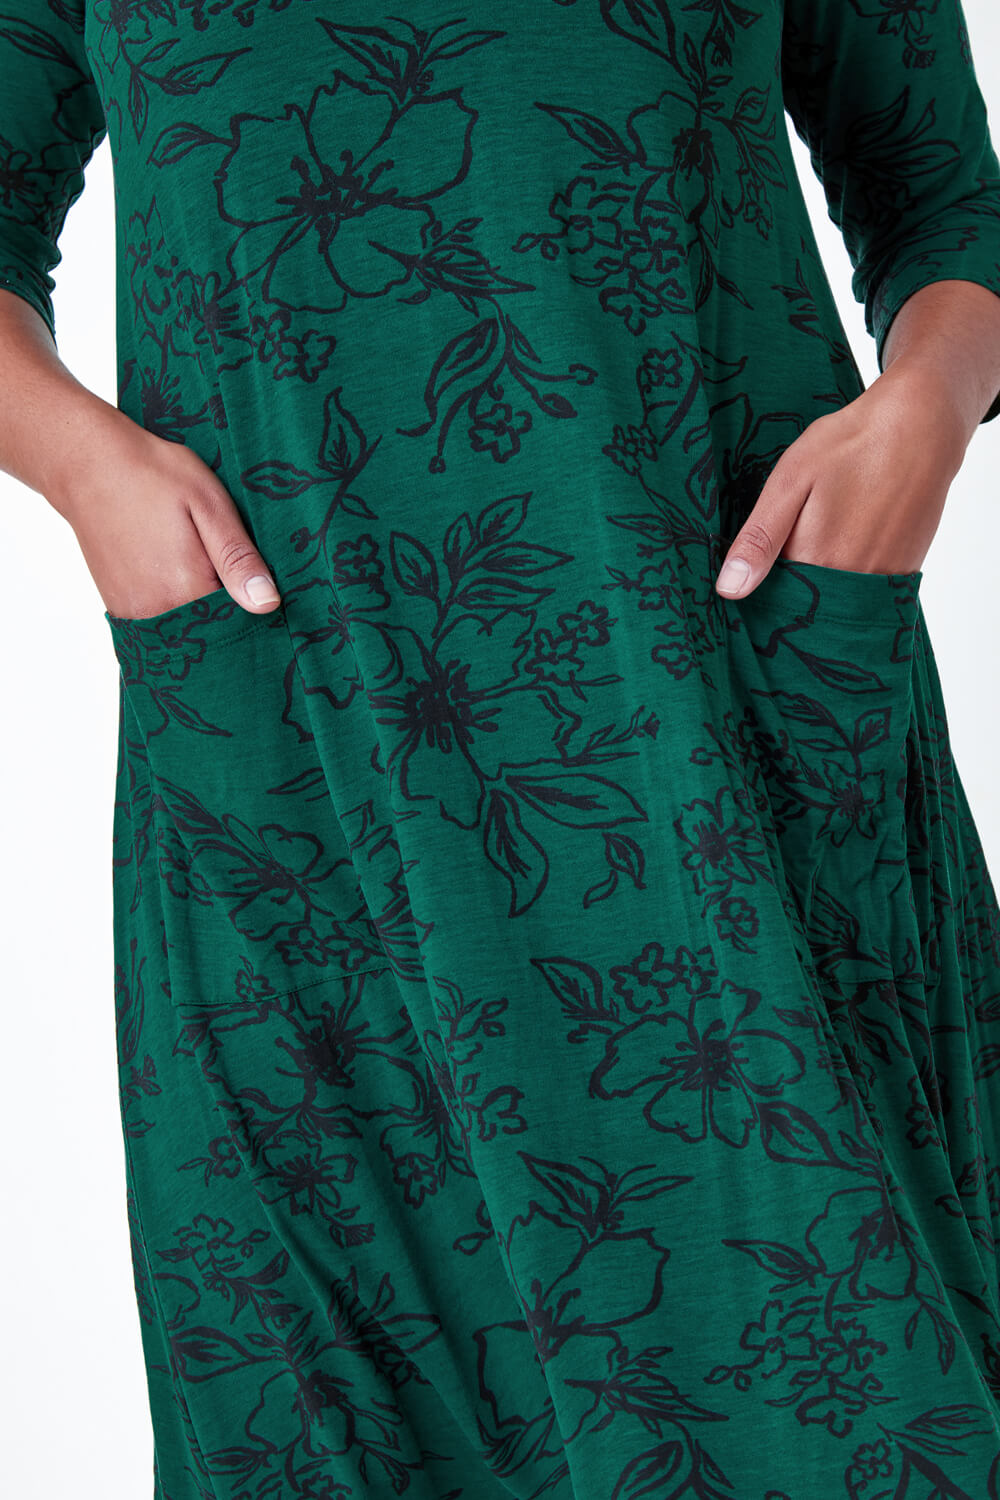 Green Curve Floral Print Swing Stretch Dress, Image 5 of 5